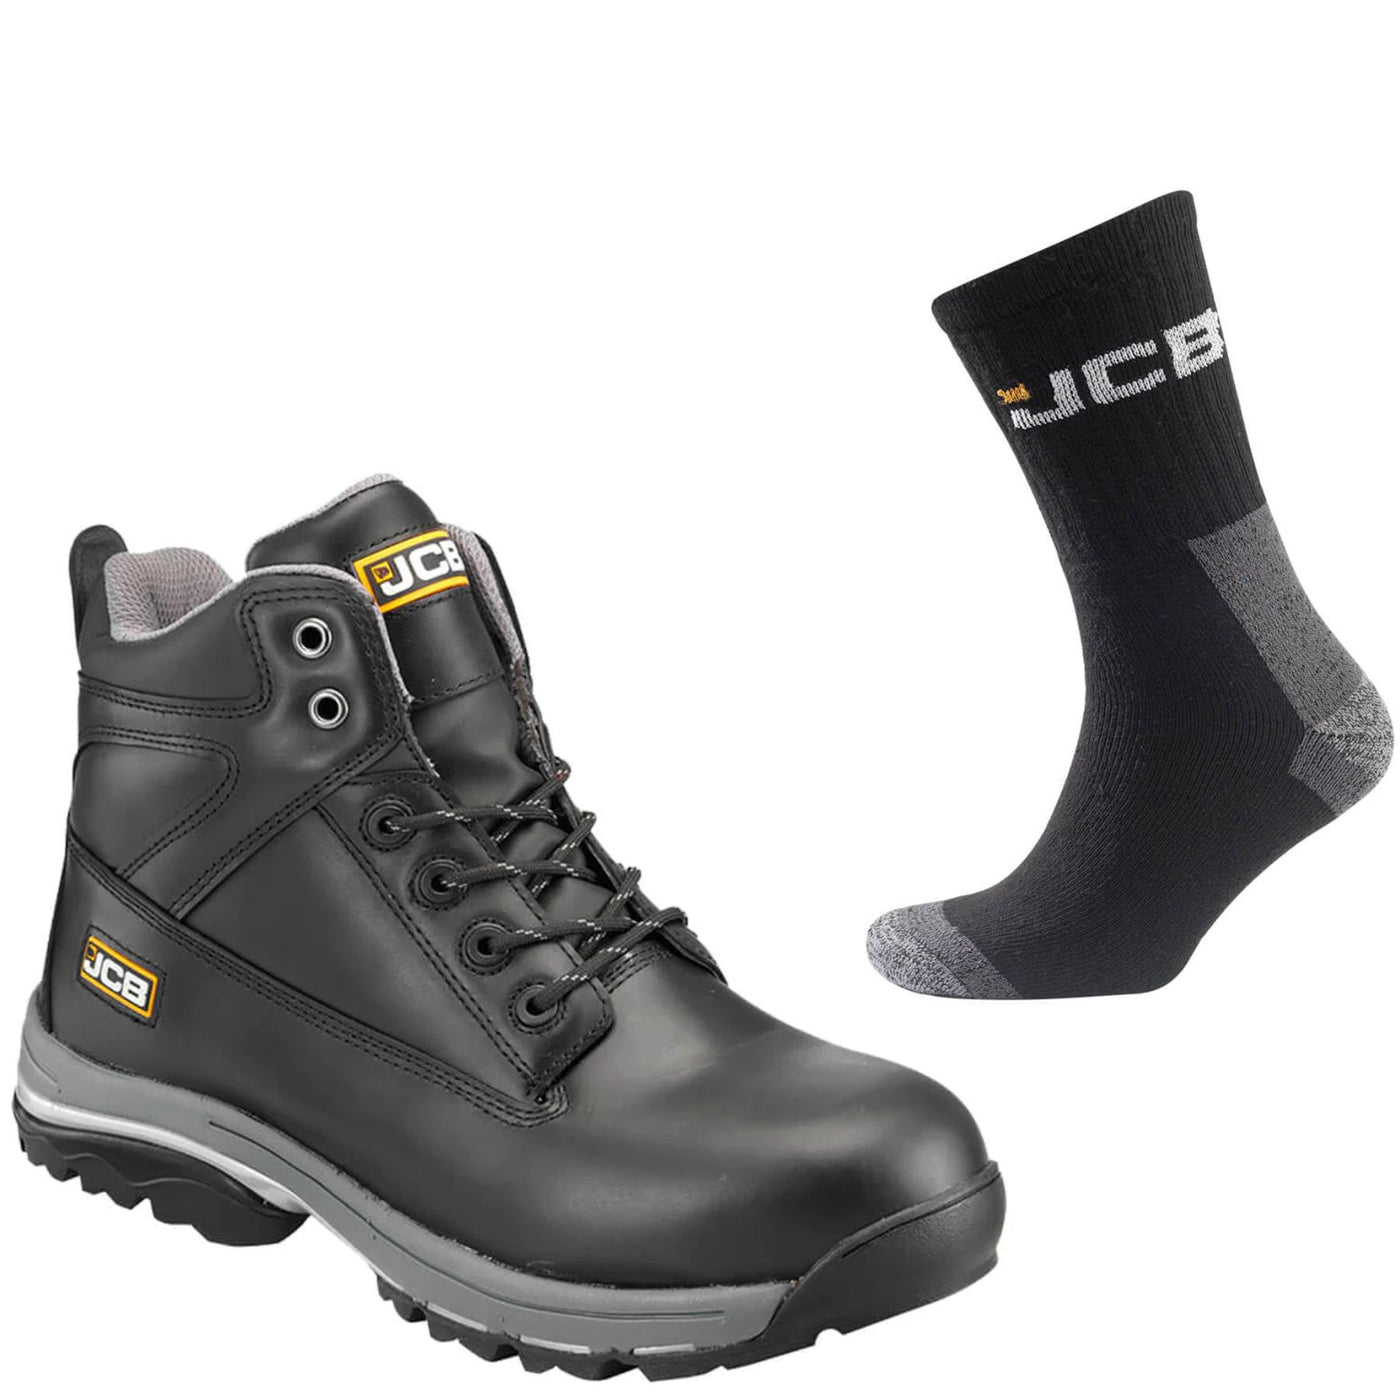 JCB Workmax Special Offer Pack - JCB Workmax Safety Boots + 3 Pairs Work Socks